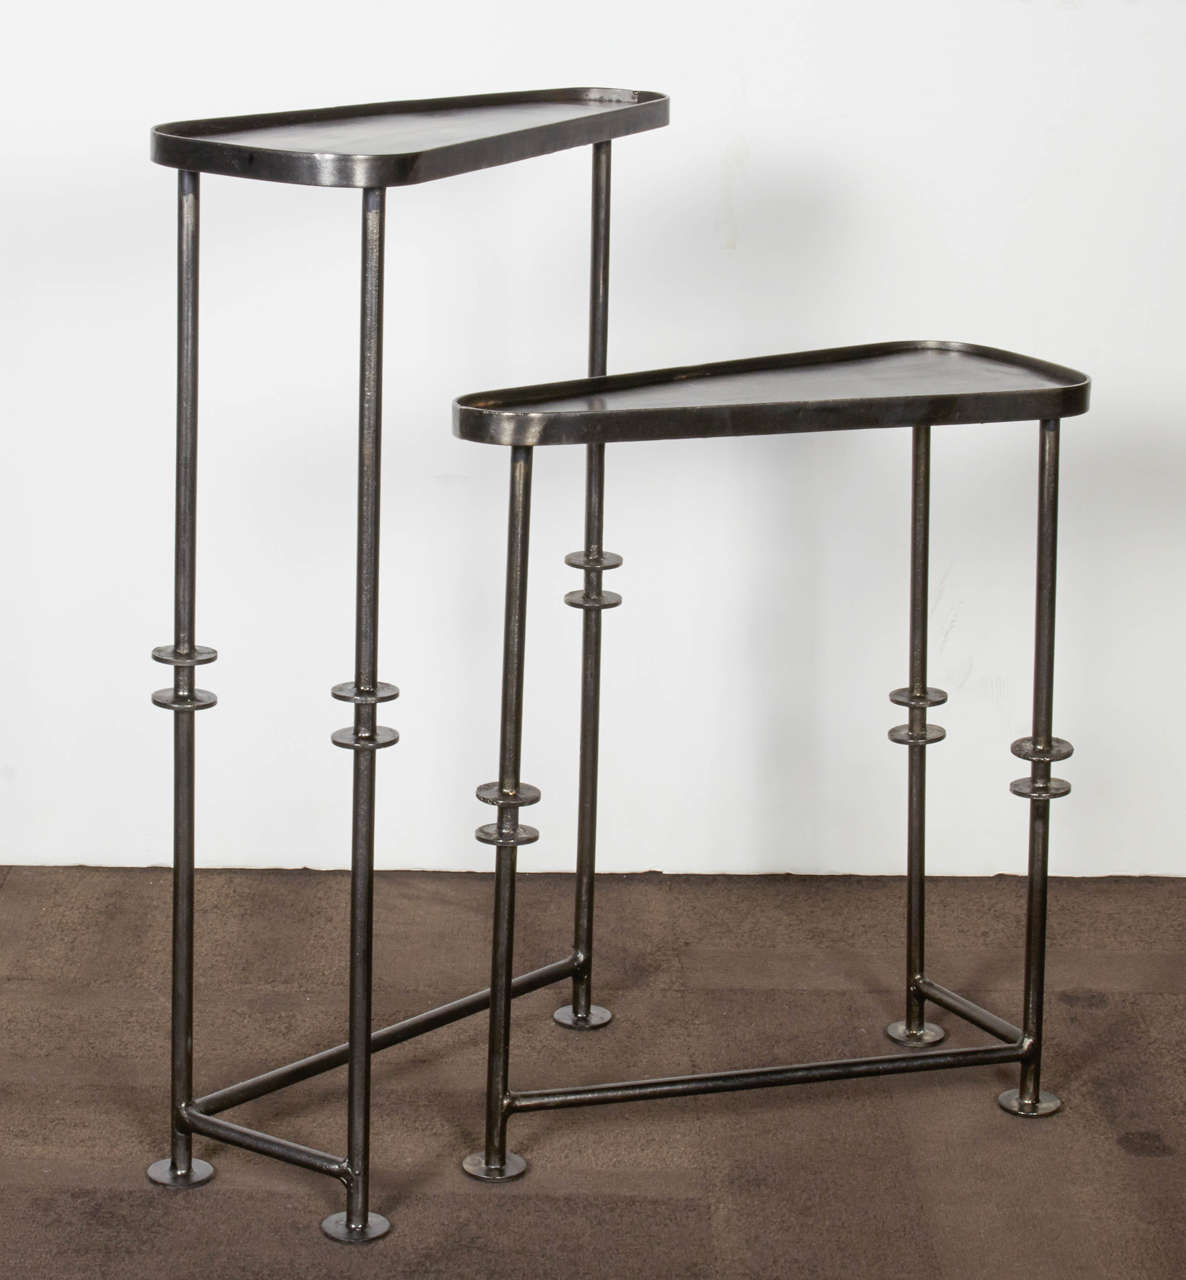 Pair of modernist Industrial side tables designed to nest in a variety of configurations. The tables feature a tripod leg design with welded metal disc details. The tables also feature asymmetrical crossbars along the base as well as triangular